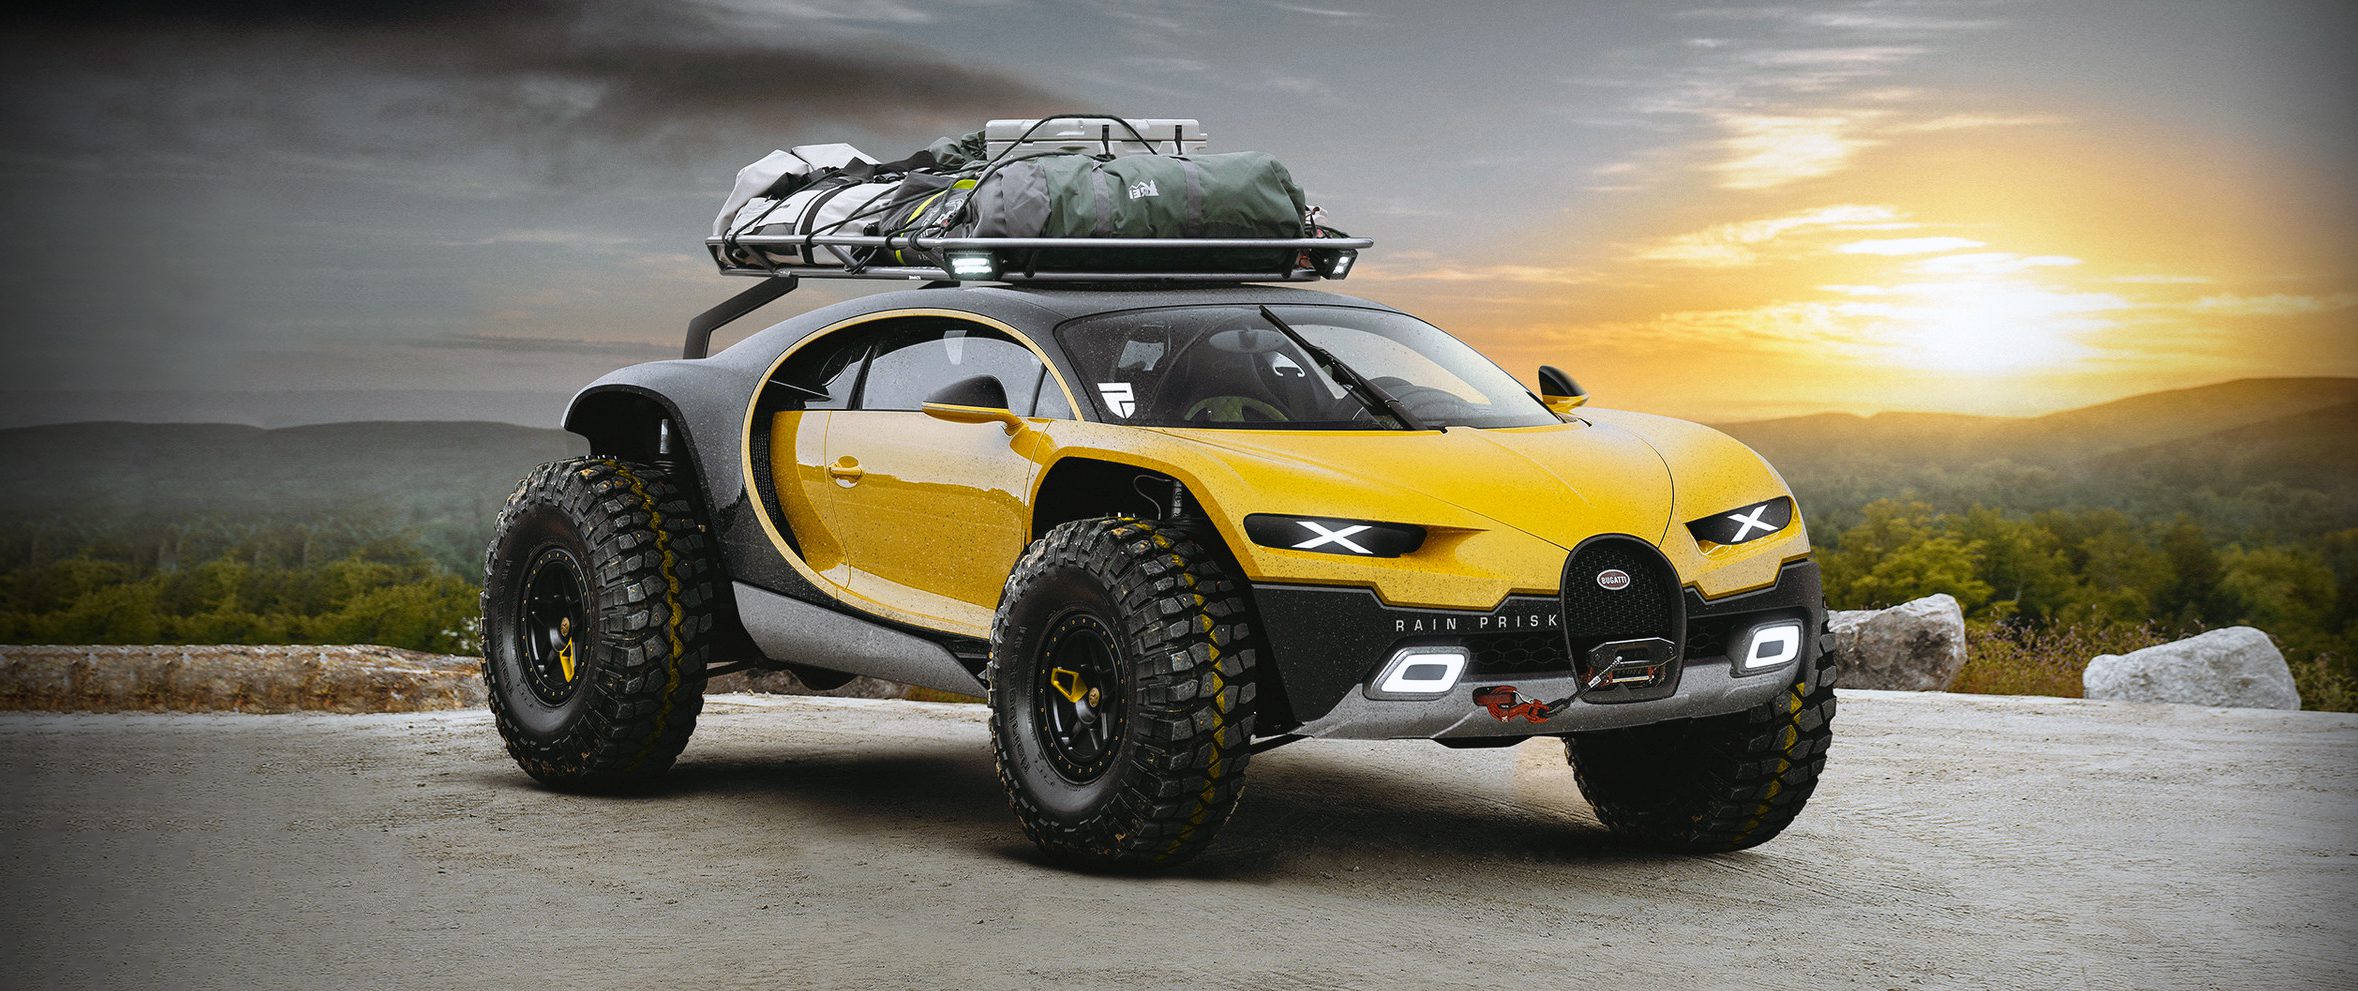 Off-road! These are the best all-terrain concept supercars